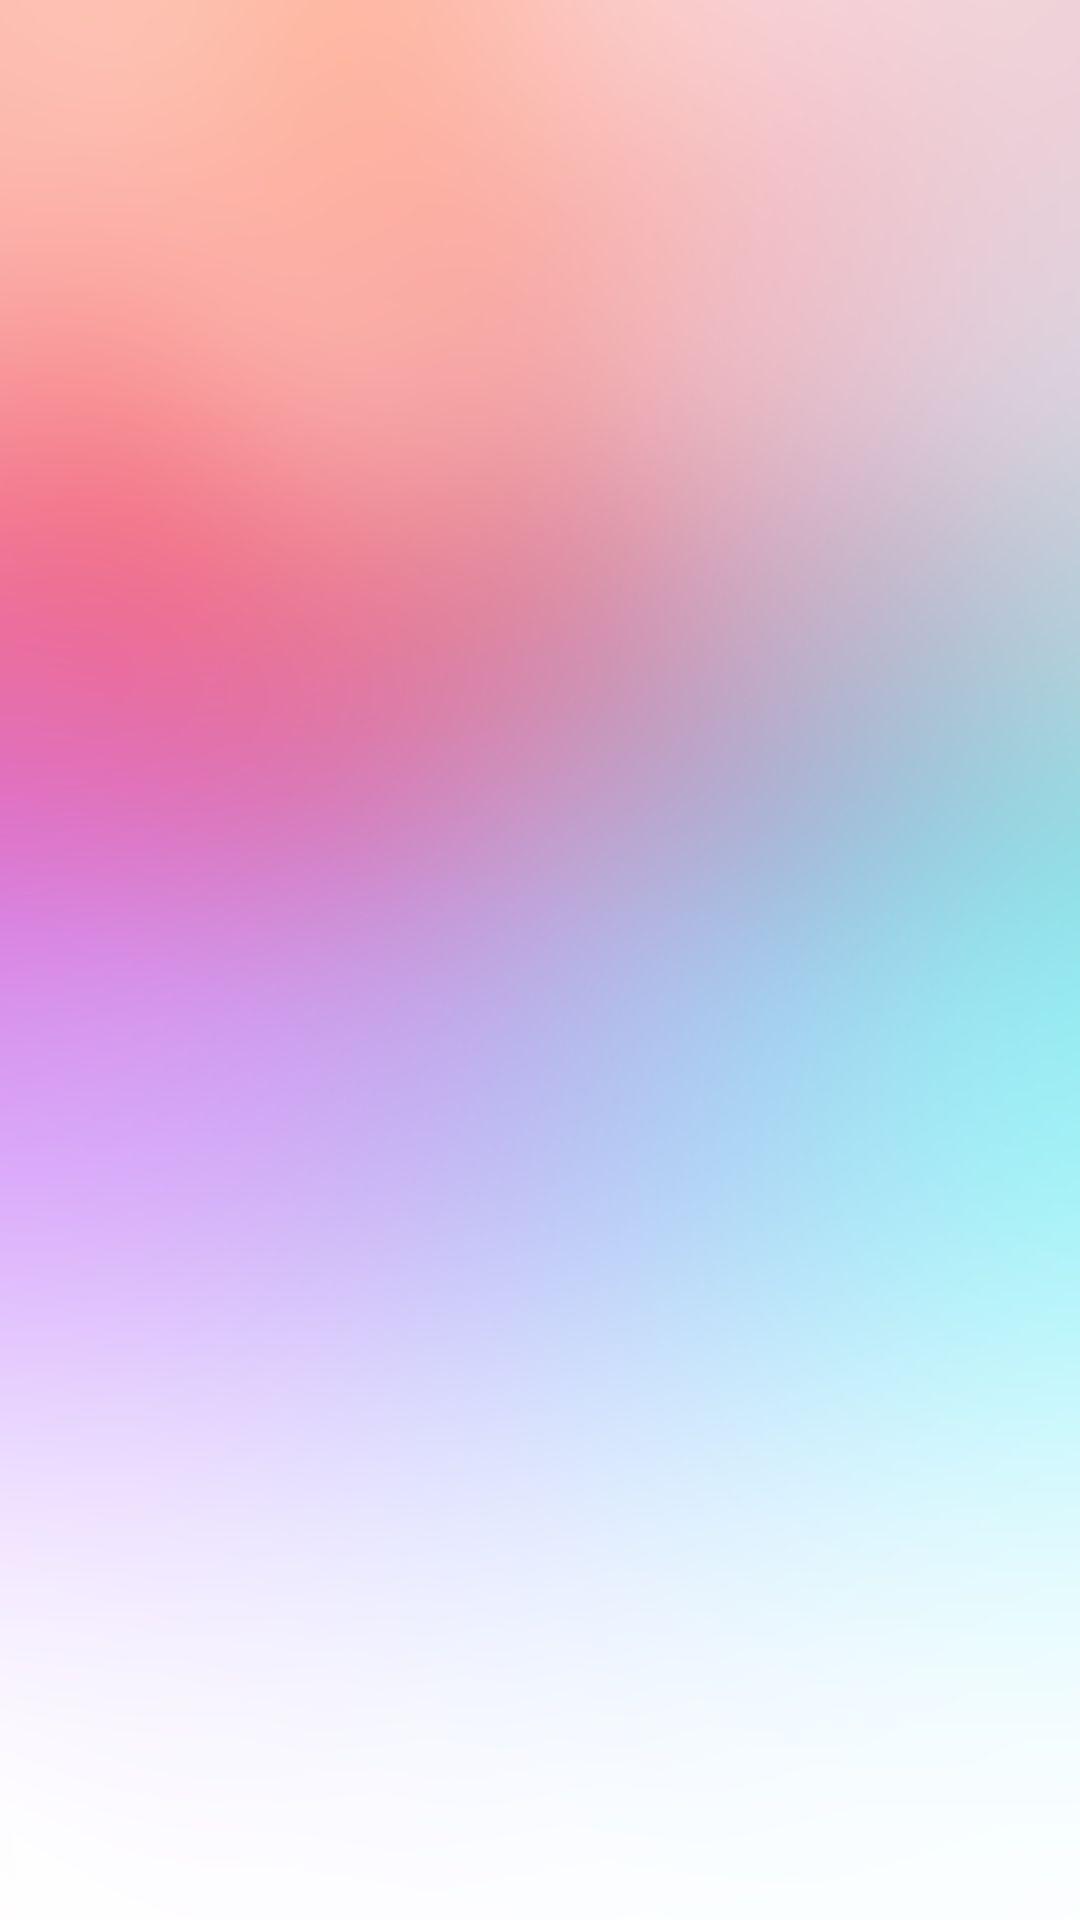 1080 x 1920 · jpeg - Pin on Iphone 6+ Wallpapers